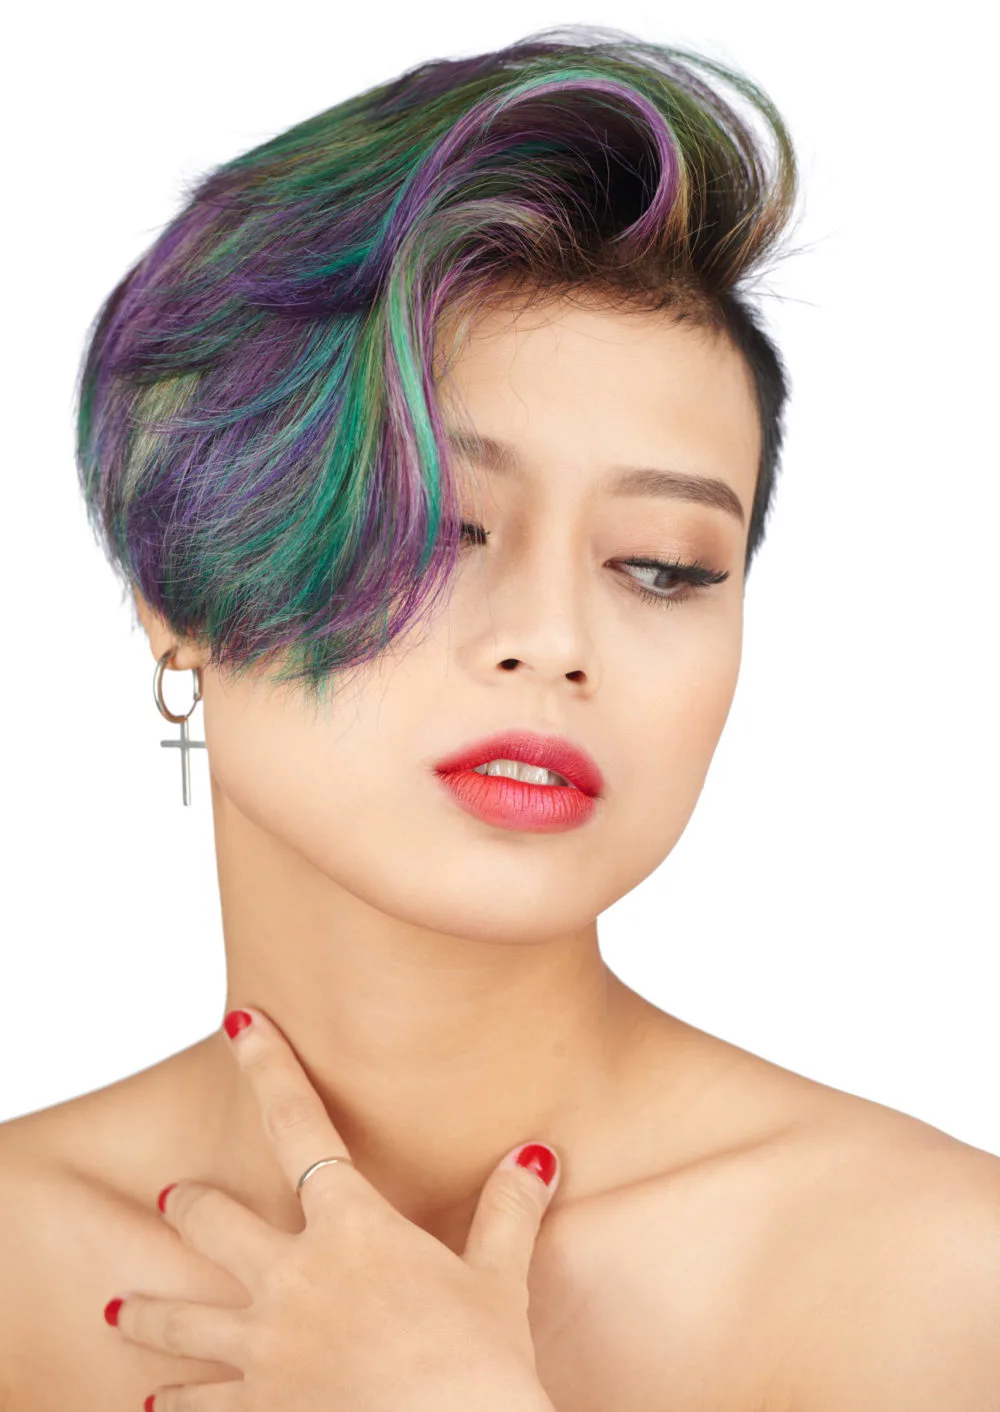 Peacock Oil Spill Hair Color in Varying Colors on a woman with short hair